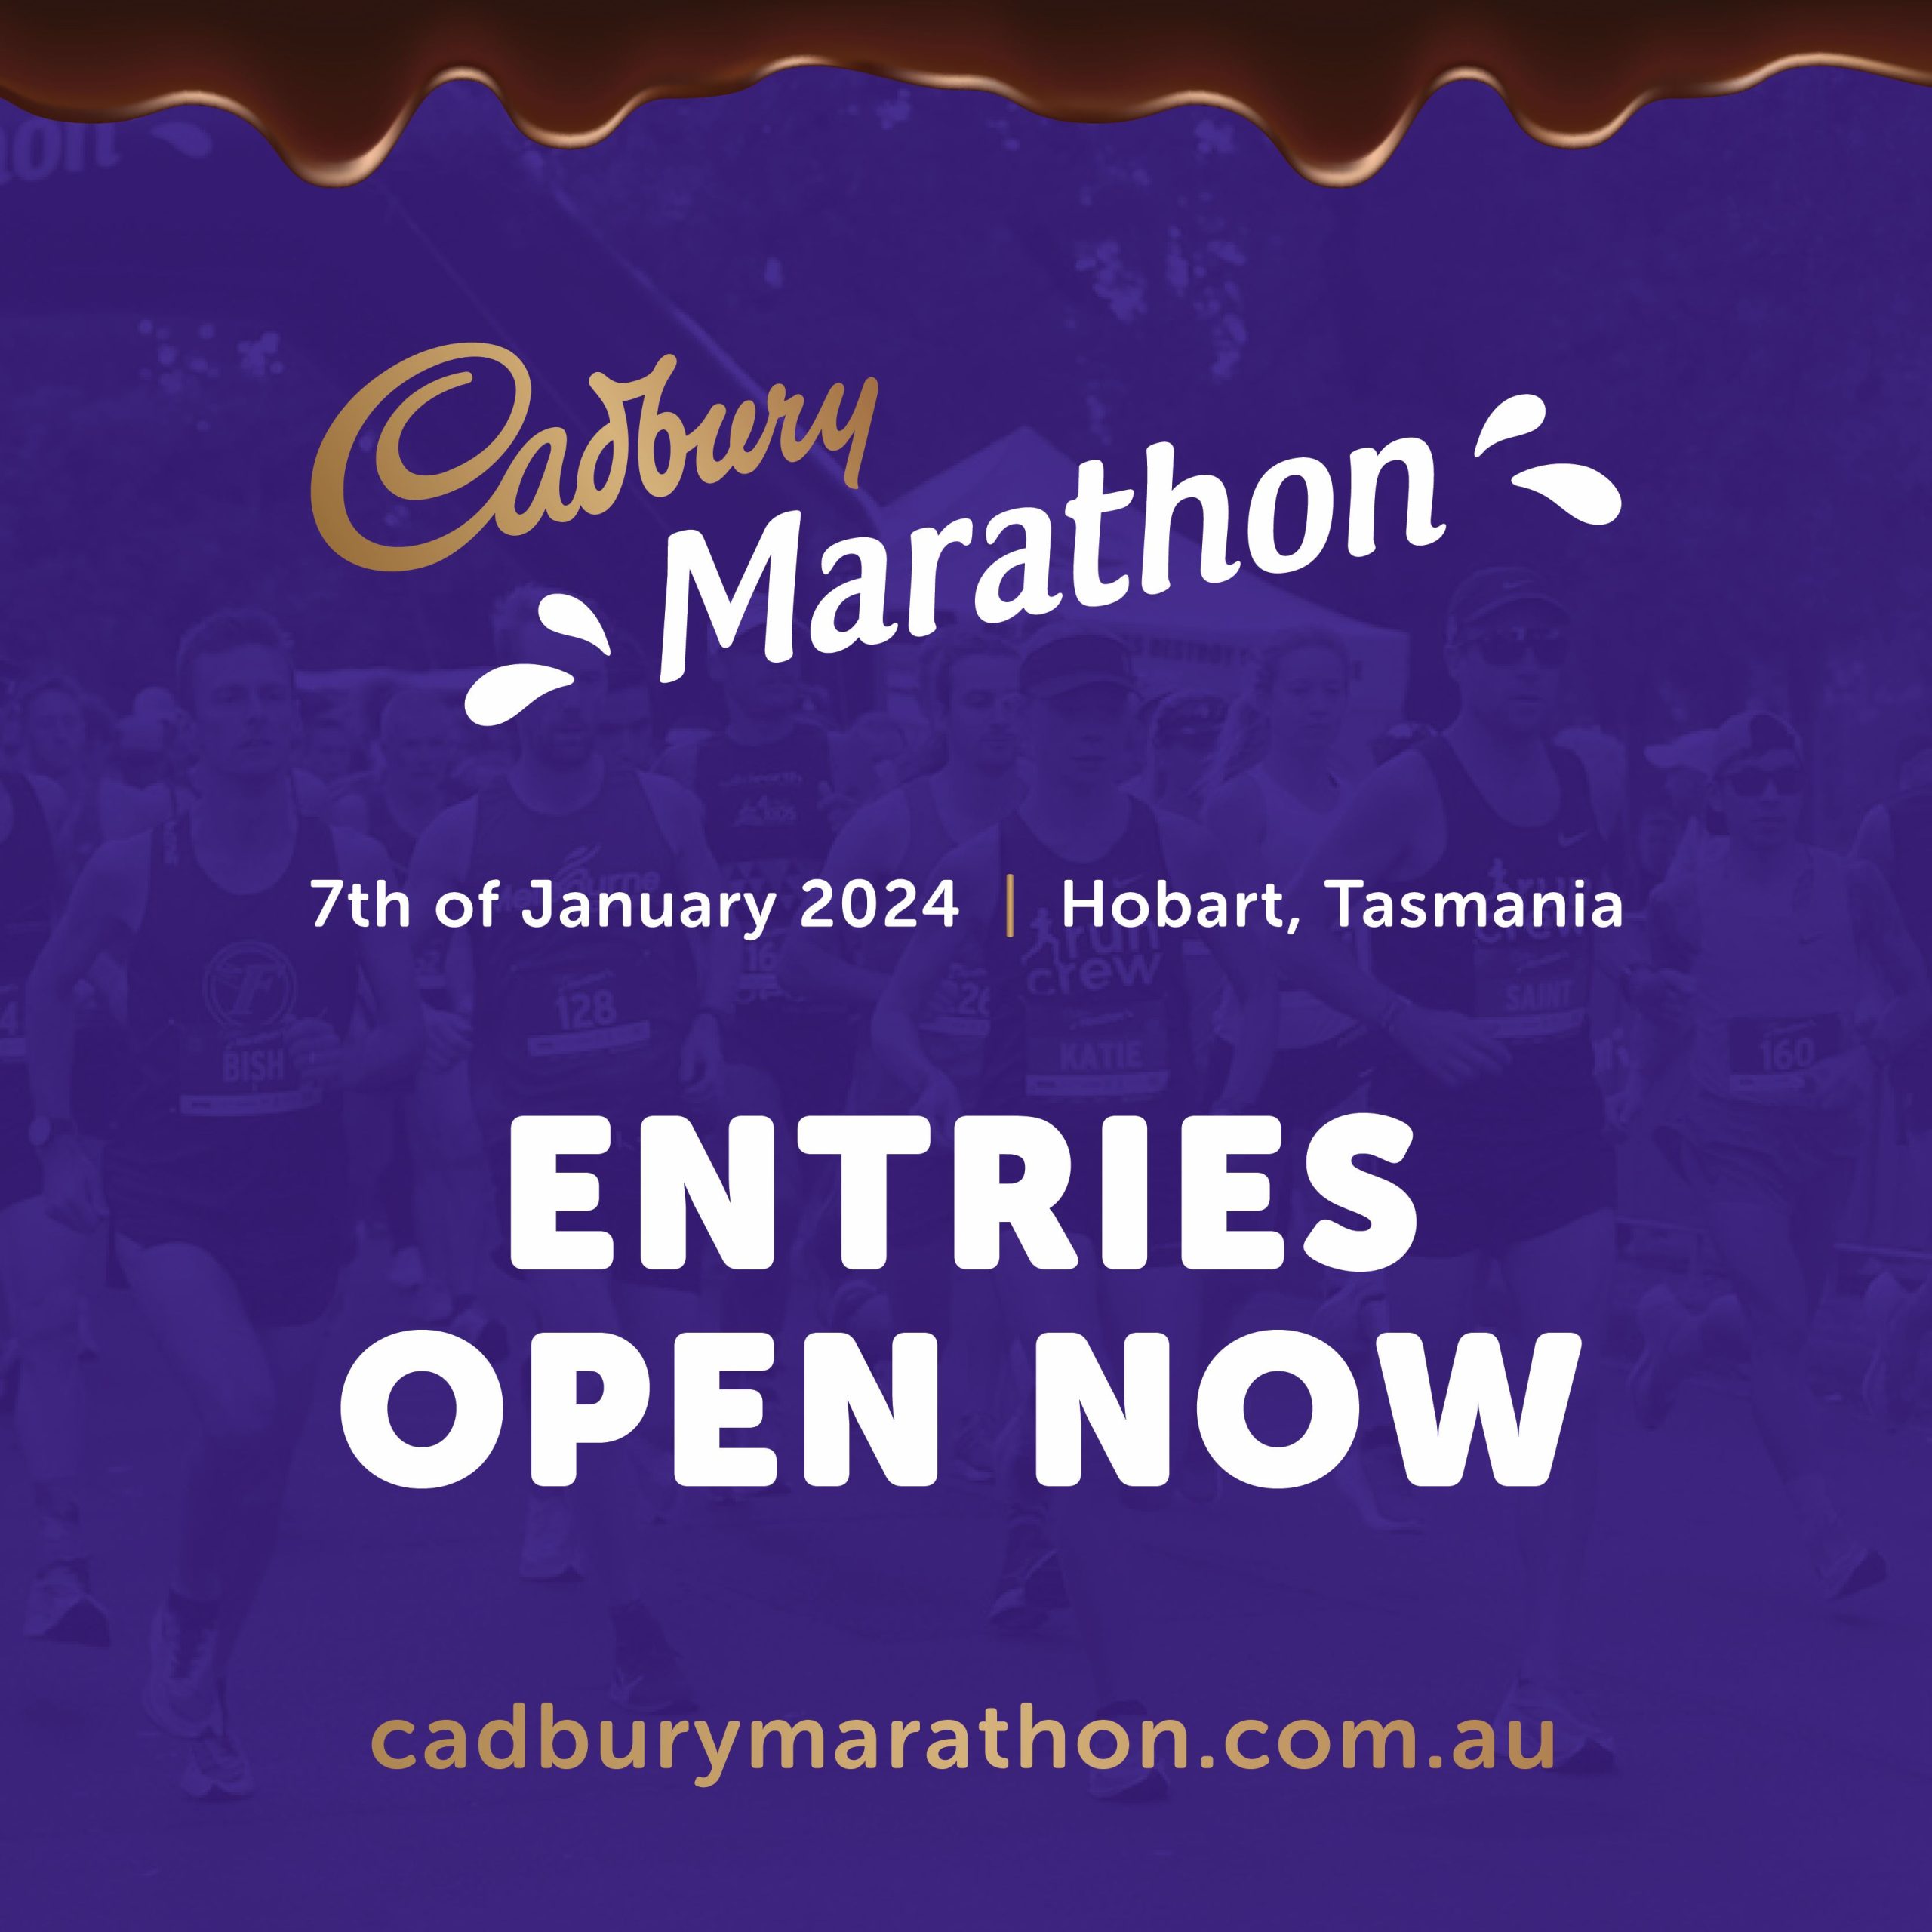 The Royal Hobart Hospital Research Foundation is the charity partner of the 2024 Cadbury Marathon